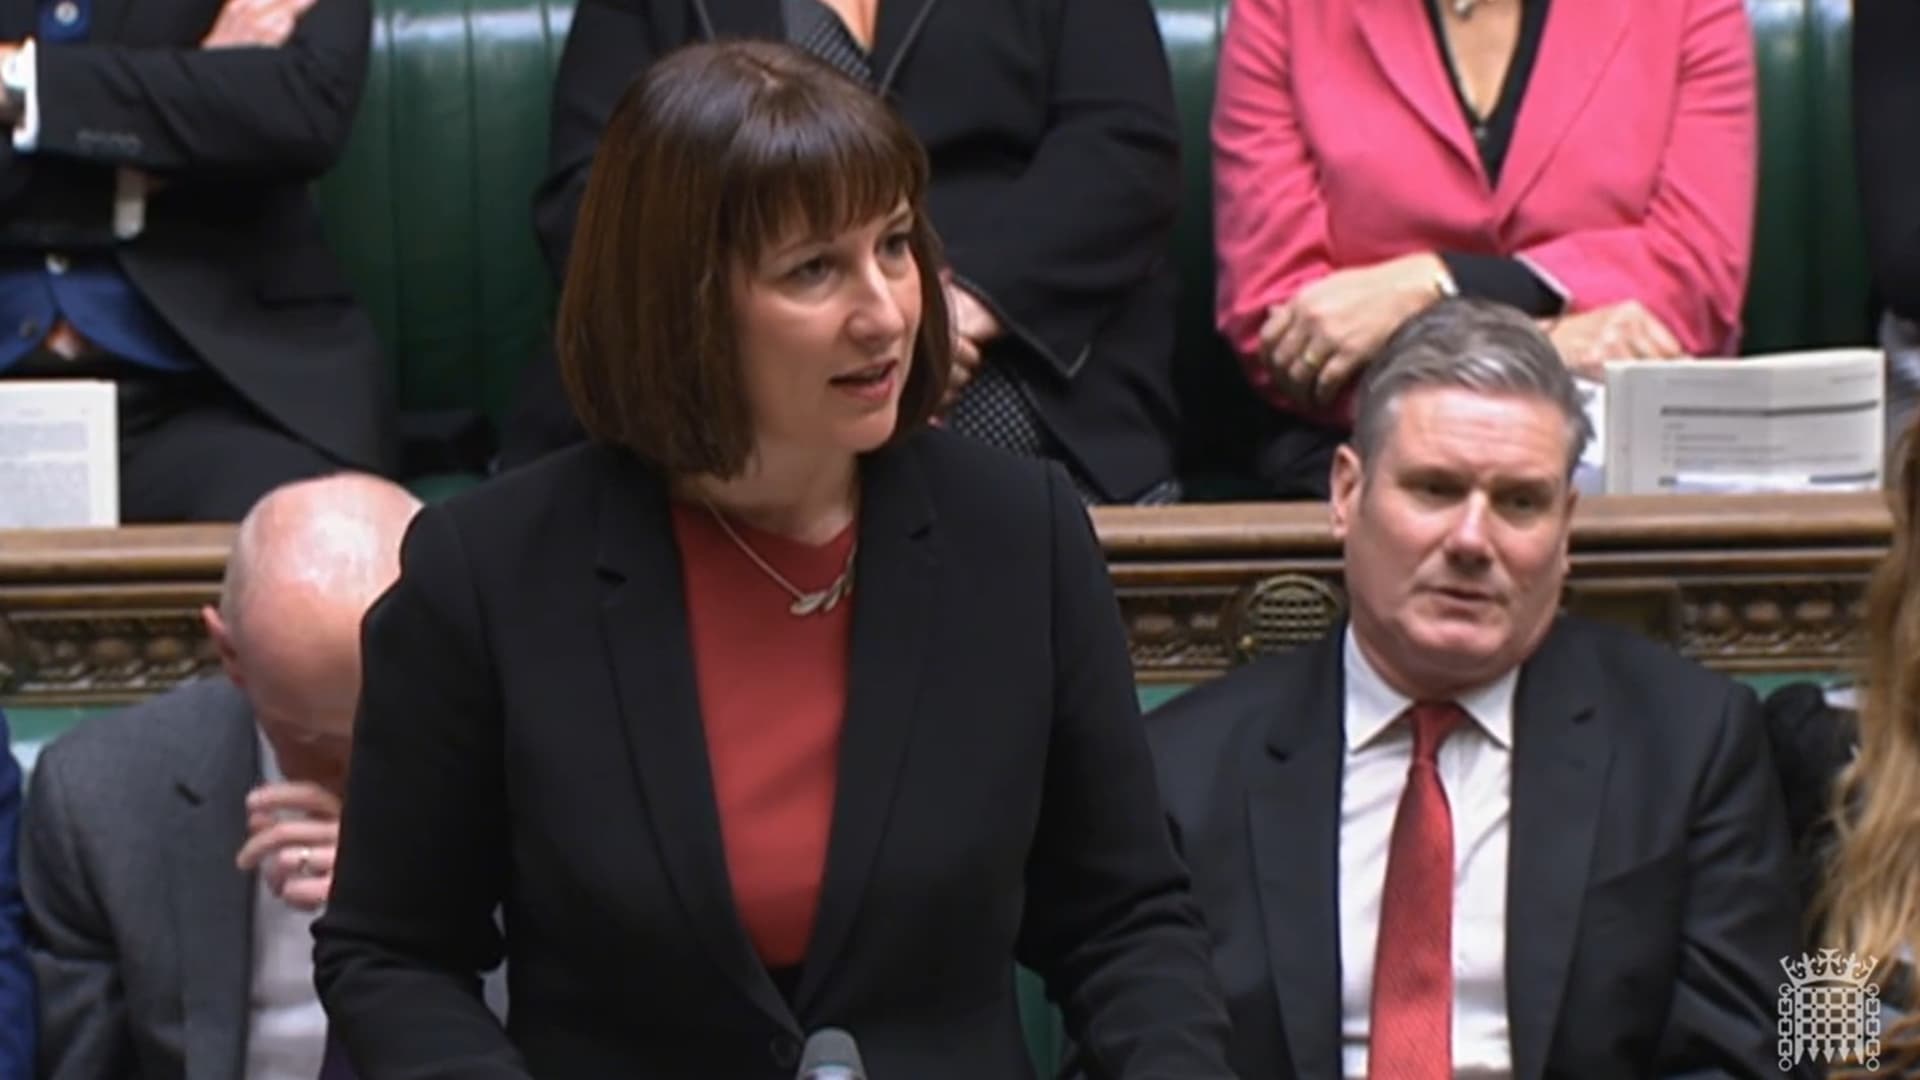 LONDON - Shadow chancellor Rachel Reeves responds after Chancellor of the Exchequer Jeremy Hunt delivered his autumn statement to MPs in the House of Commons.